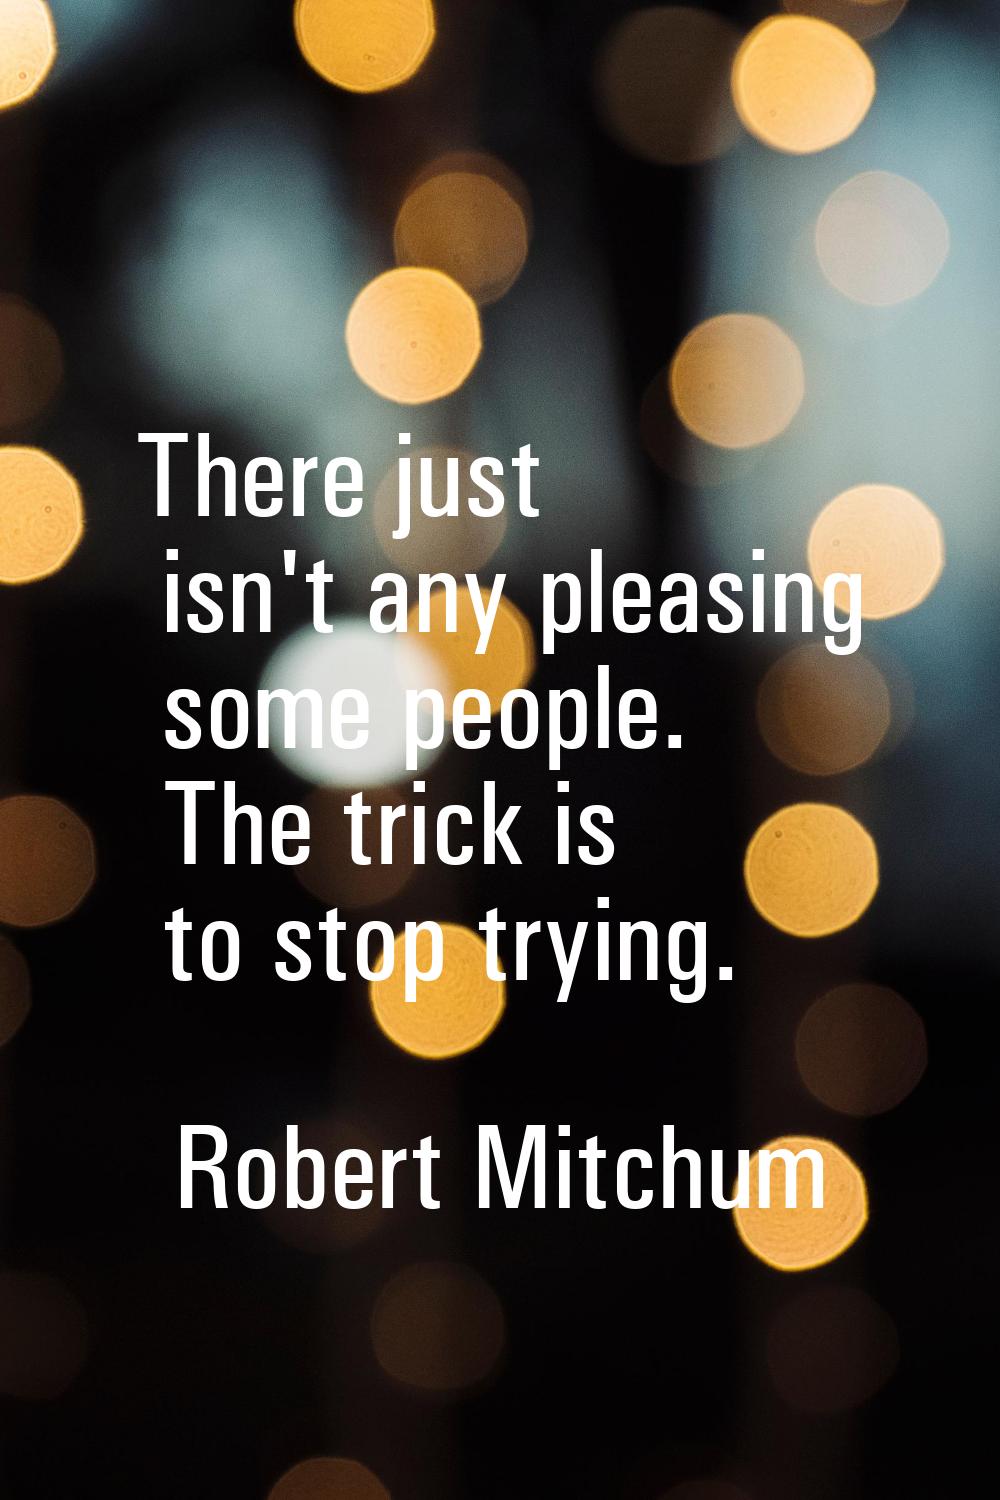 There just isn't any pleasing some people. The trick is to stop trying.